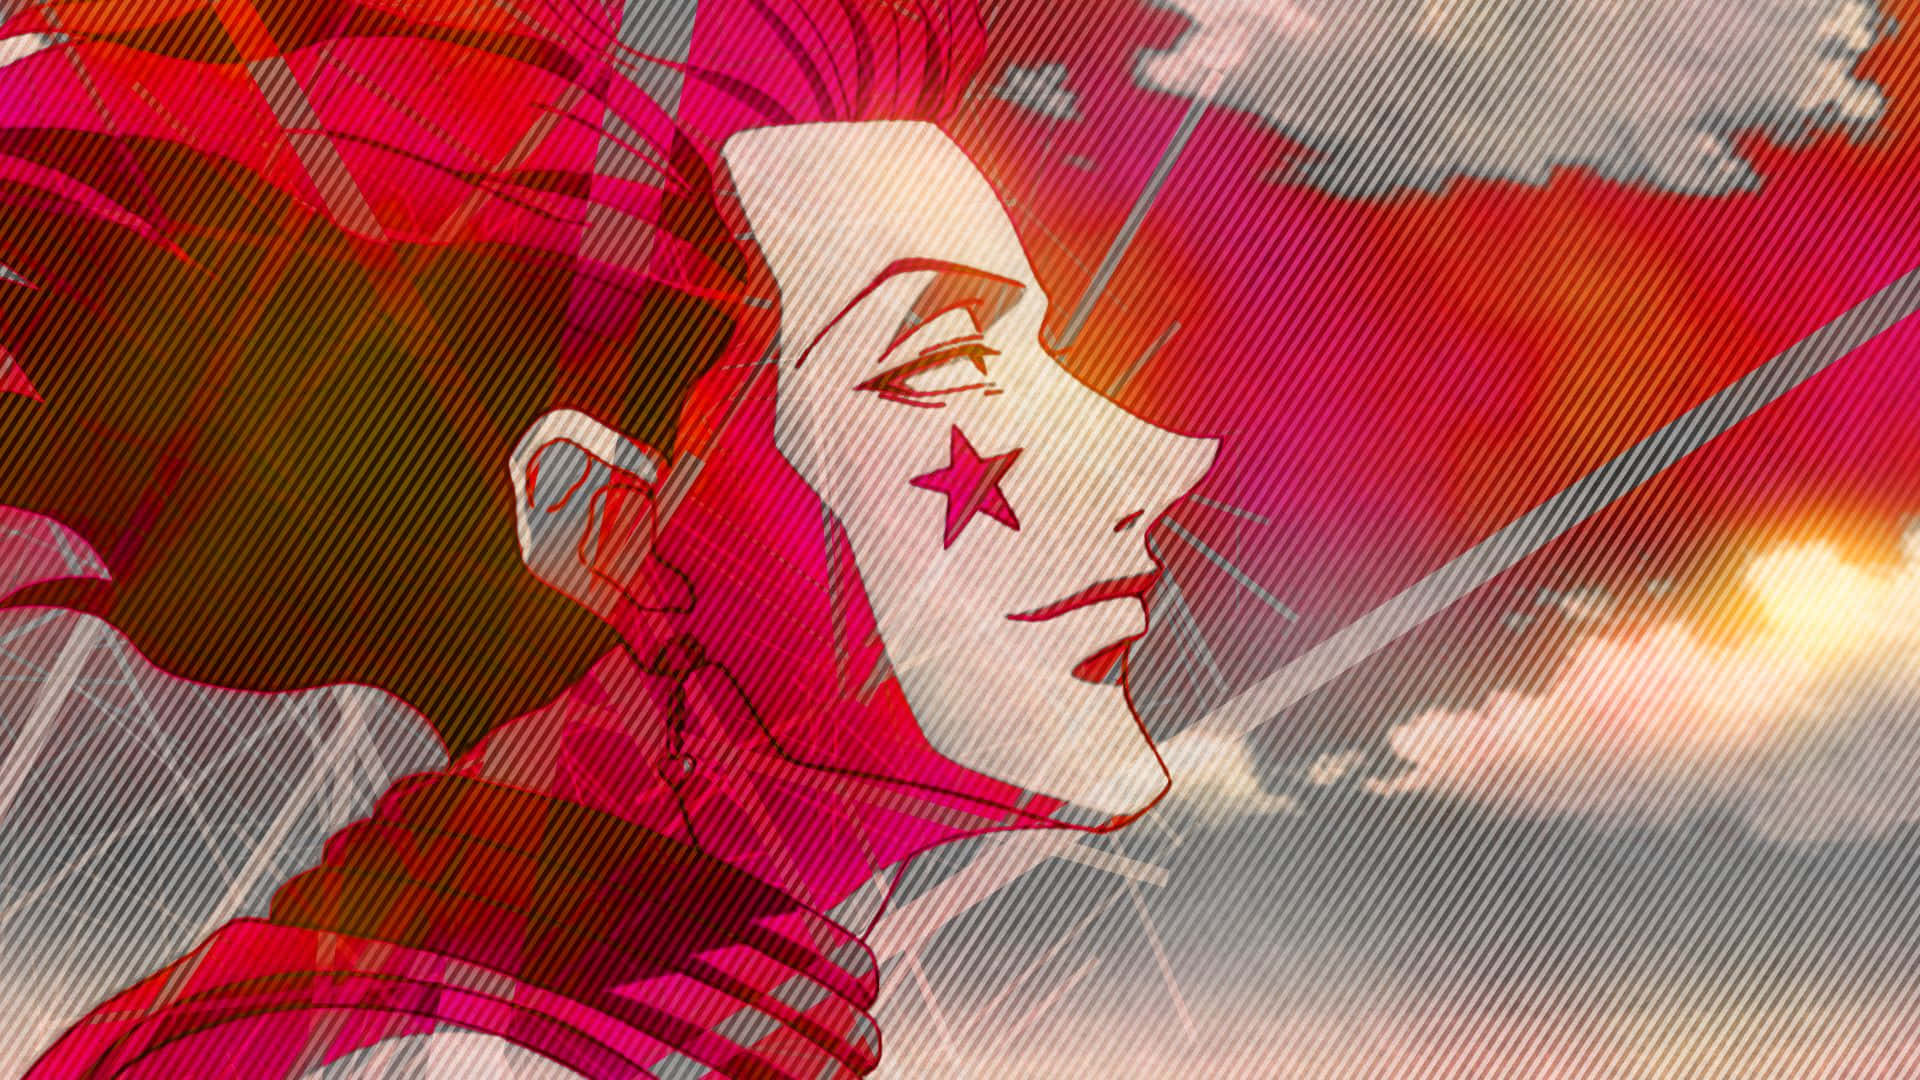 Hisoka Morow displaying his sinister smile in a powerful stance Wallpaper